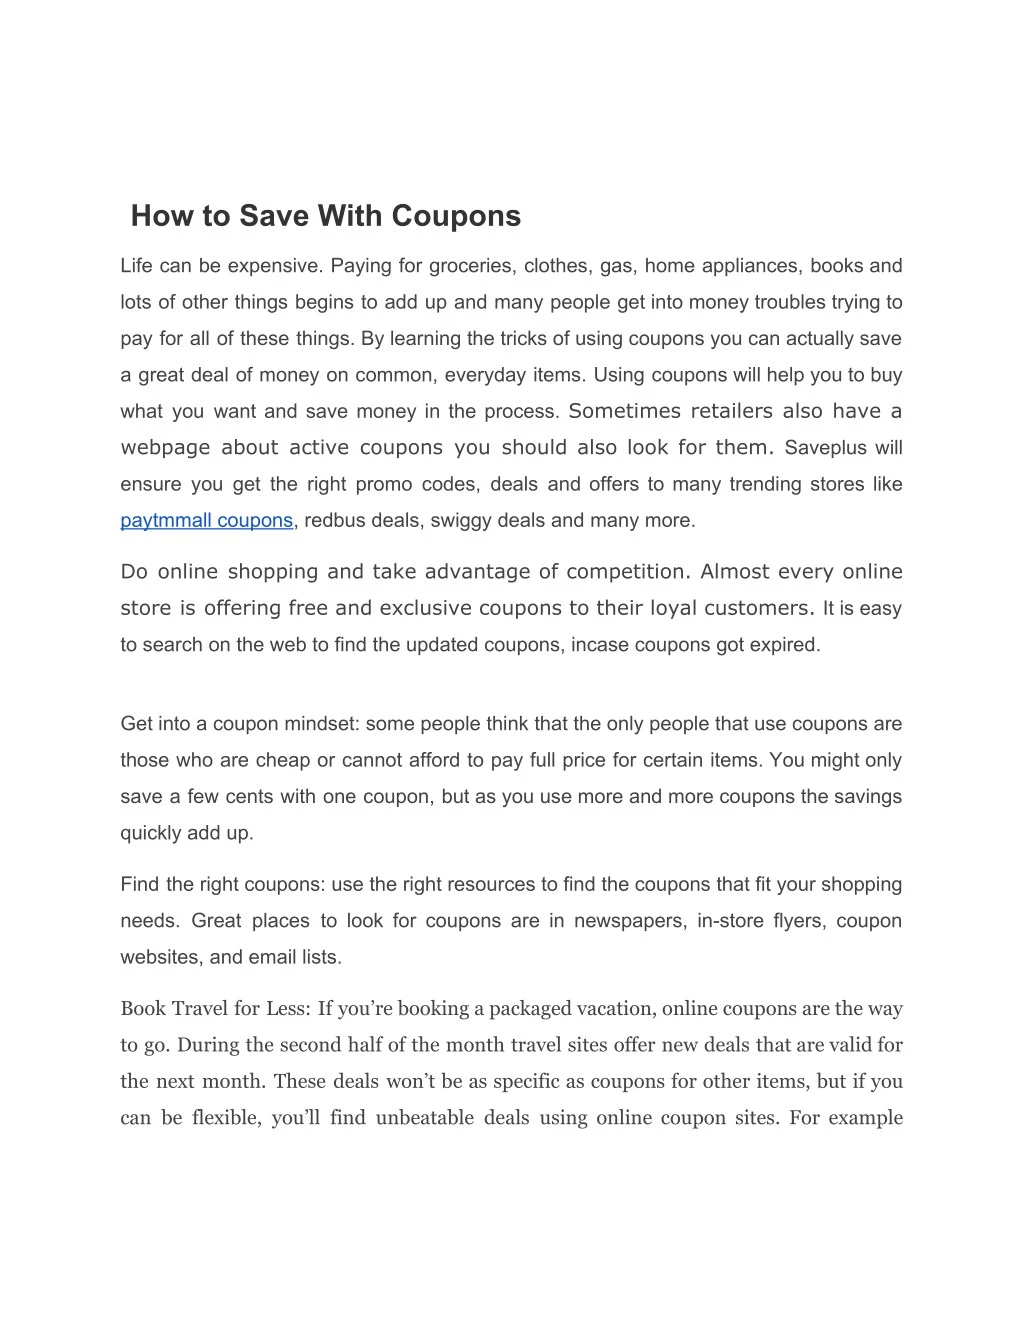 how to save with coupons